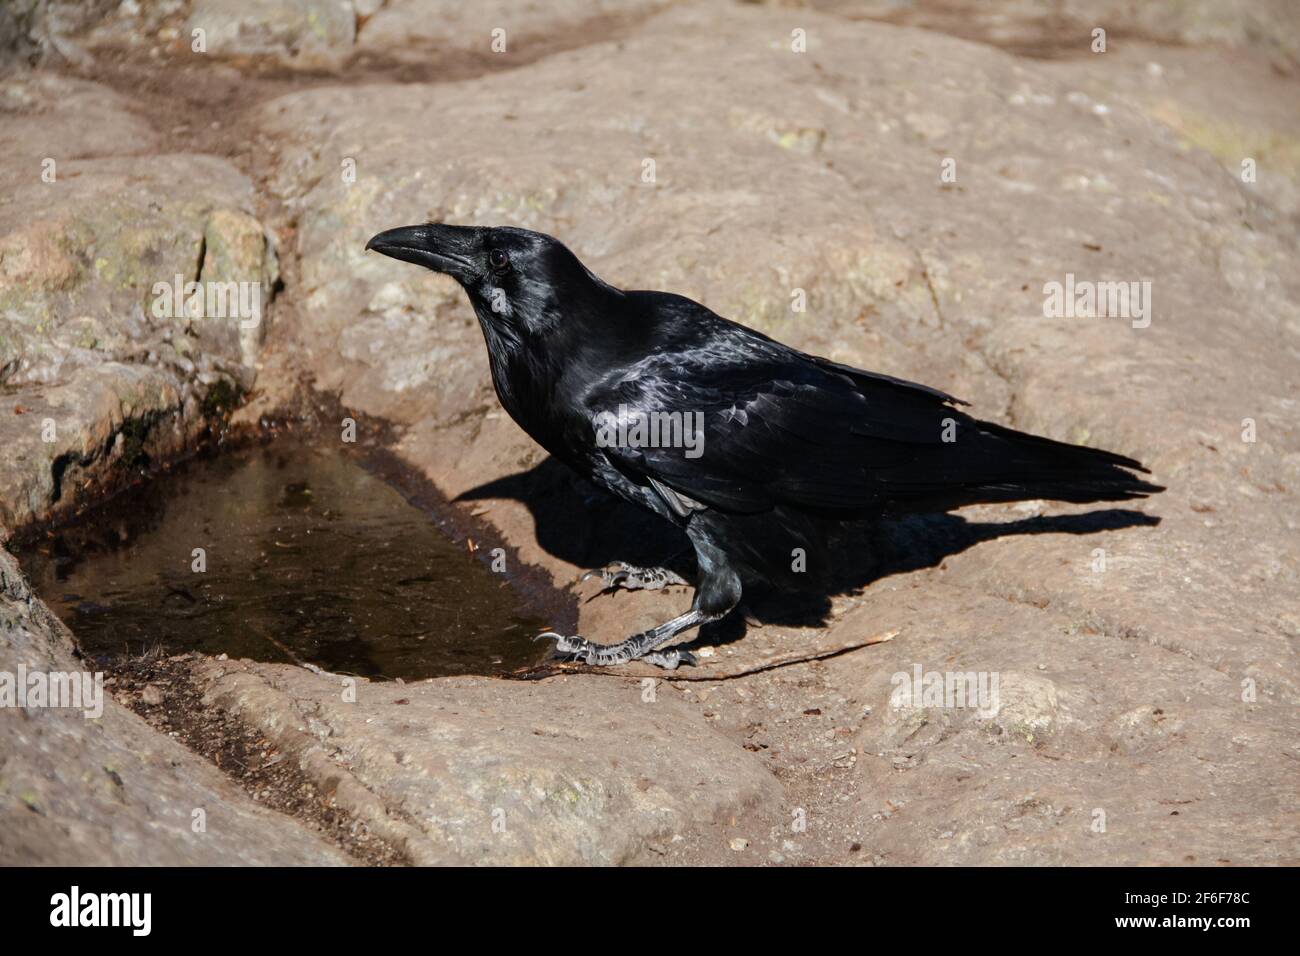 October 10 2018: A northwestern crow, or corvus caurinus, poses for the camera at the Dog Mountain summit lookout in North Vancouver, British Columbia. Stock Photo